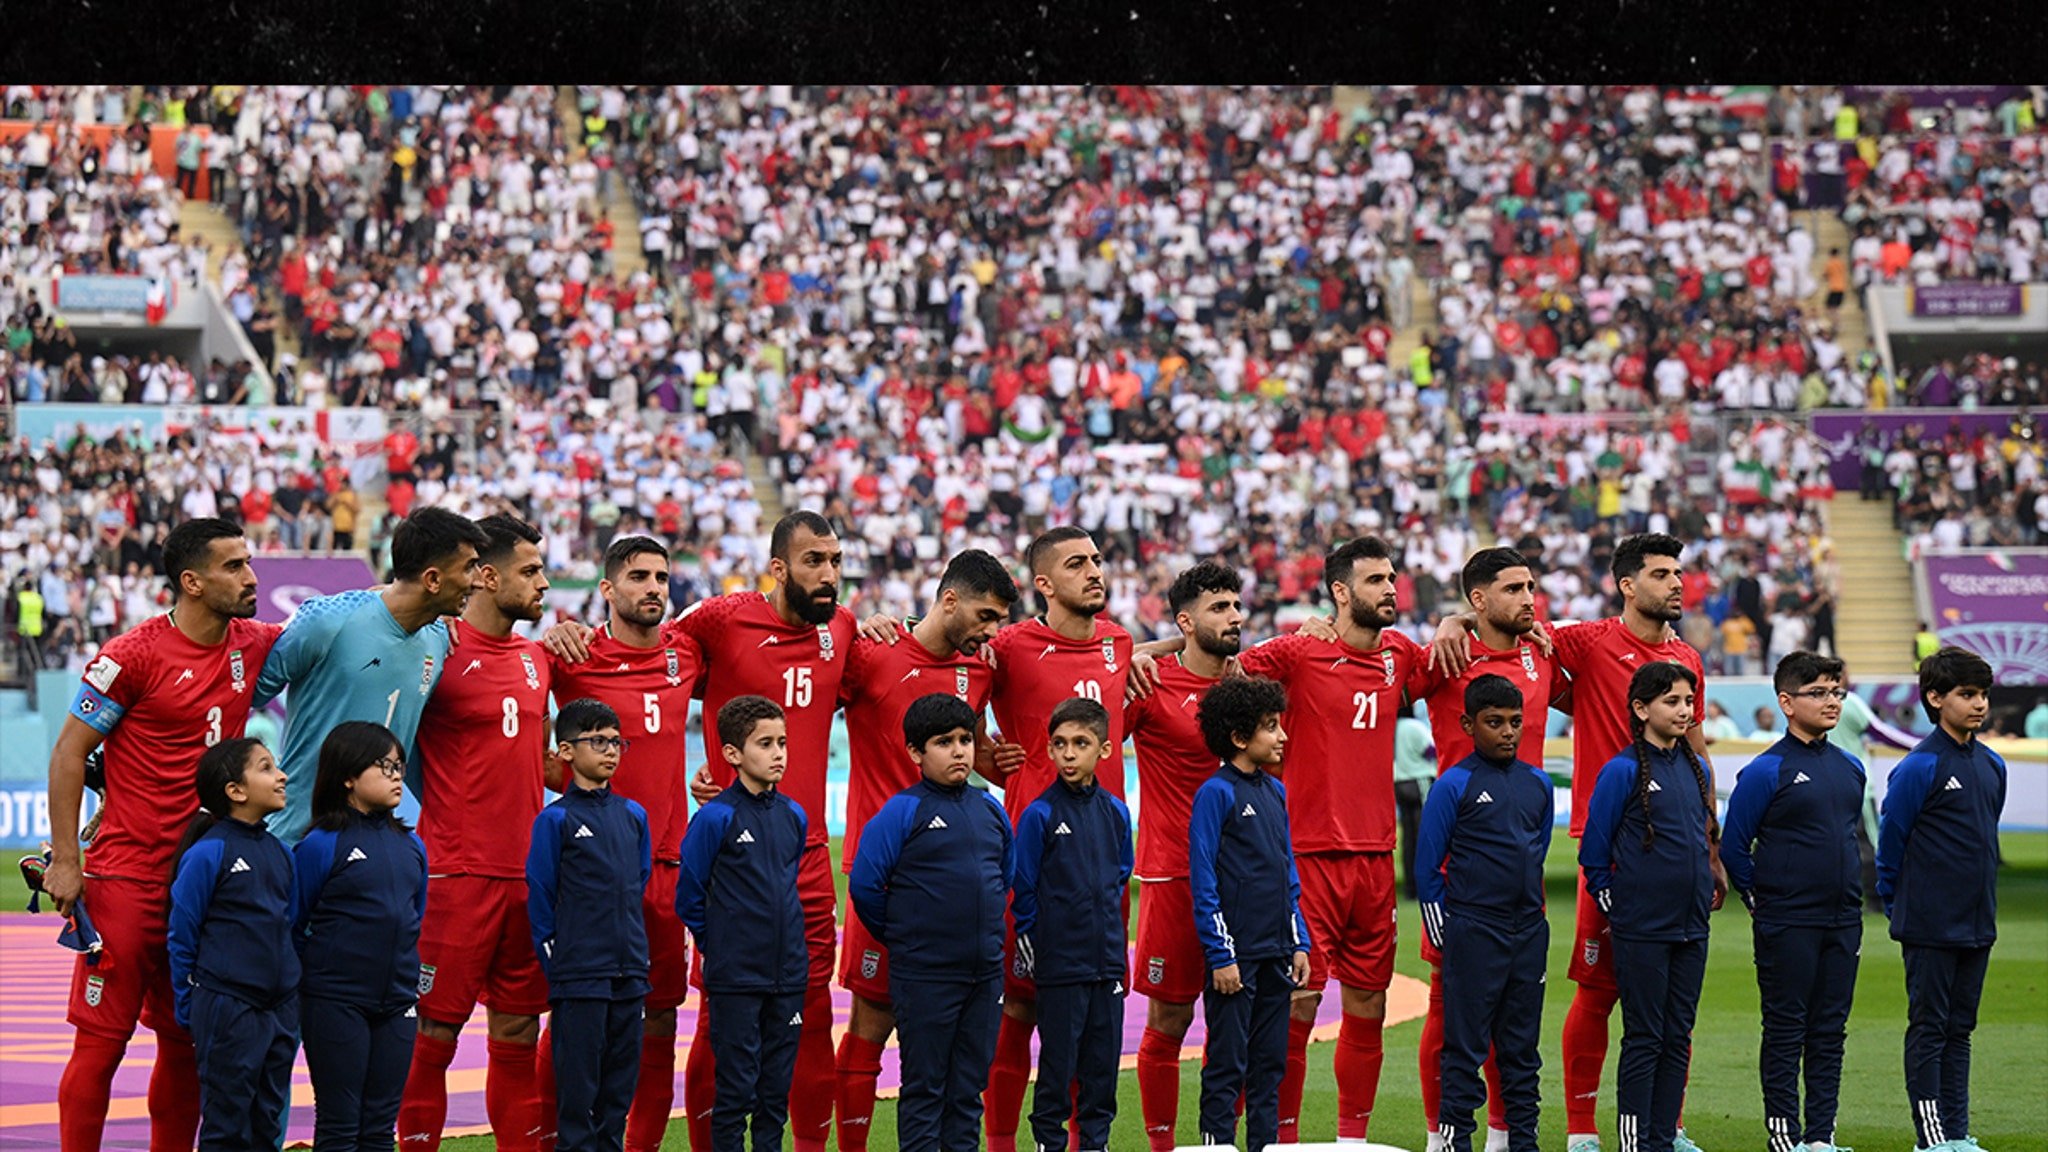 Iran Soccer Players Could Face Arrests, Beatings ... Upon Return From W.C.